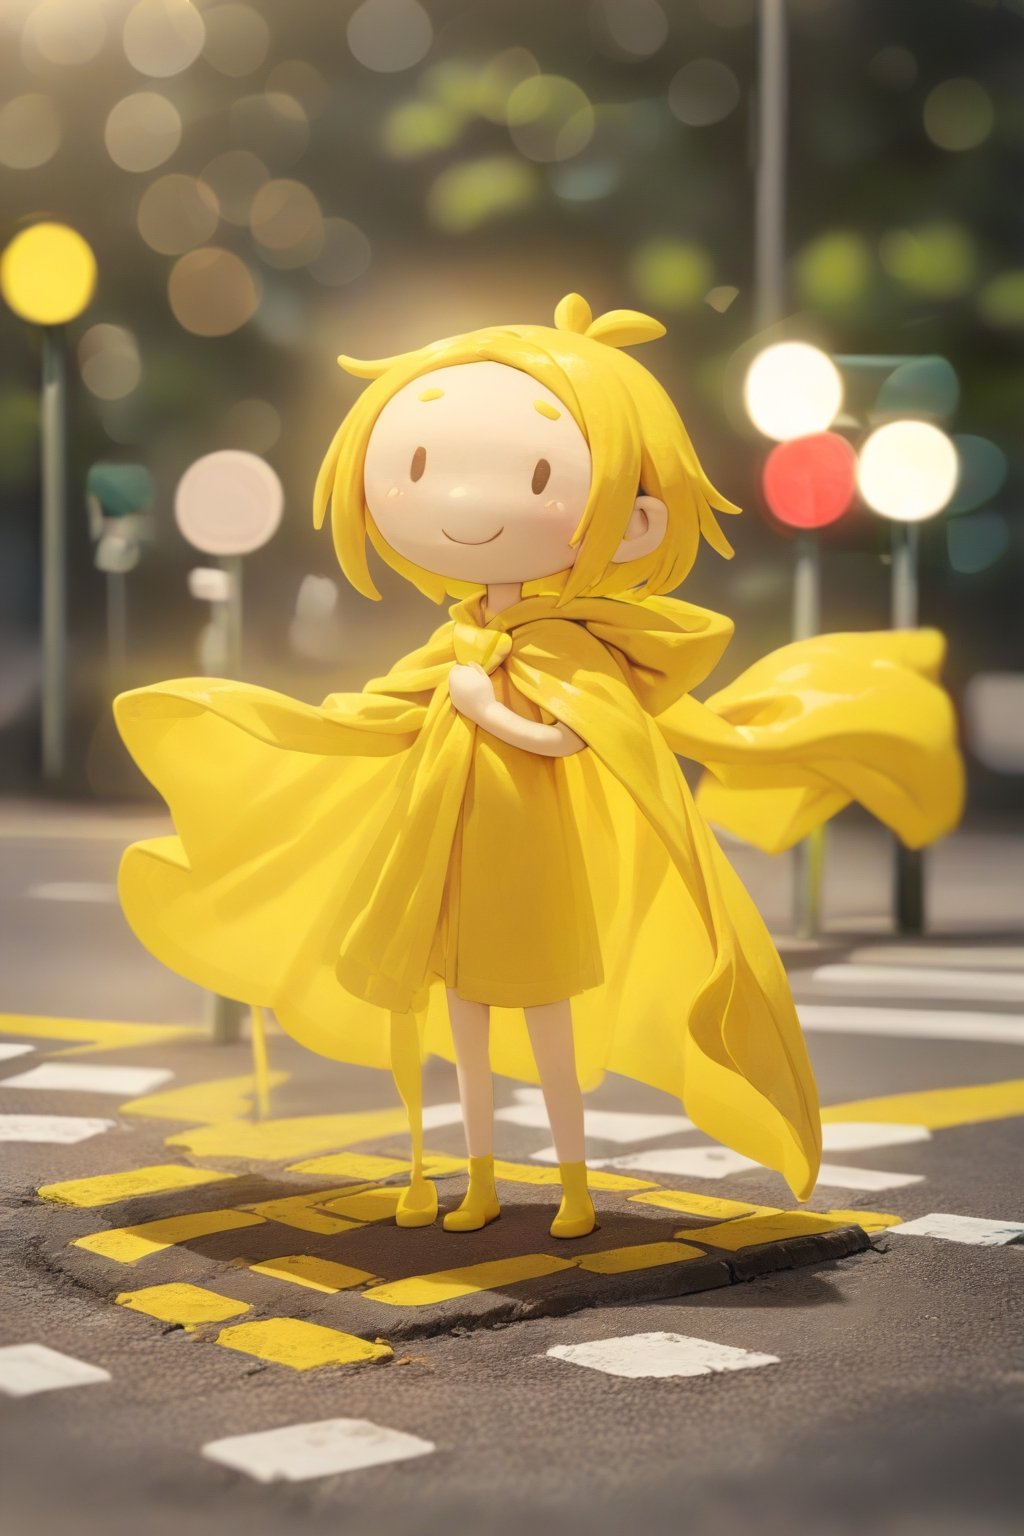 1 girl, cute, cape, transparent, crossroads, traffic lights, masterpiece, best quality, very aesthetic, extremely detailed, plasticine